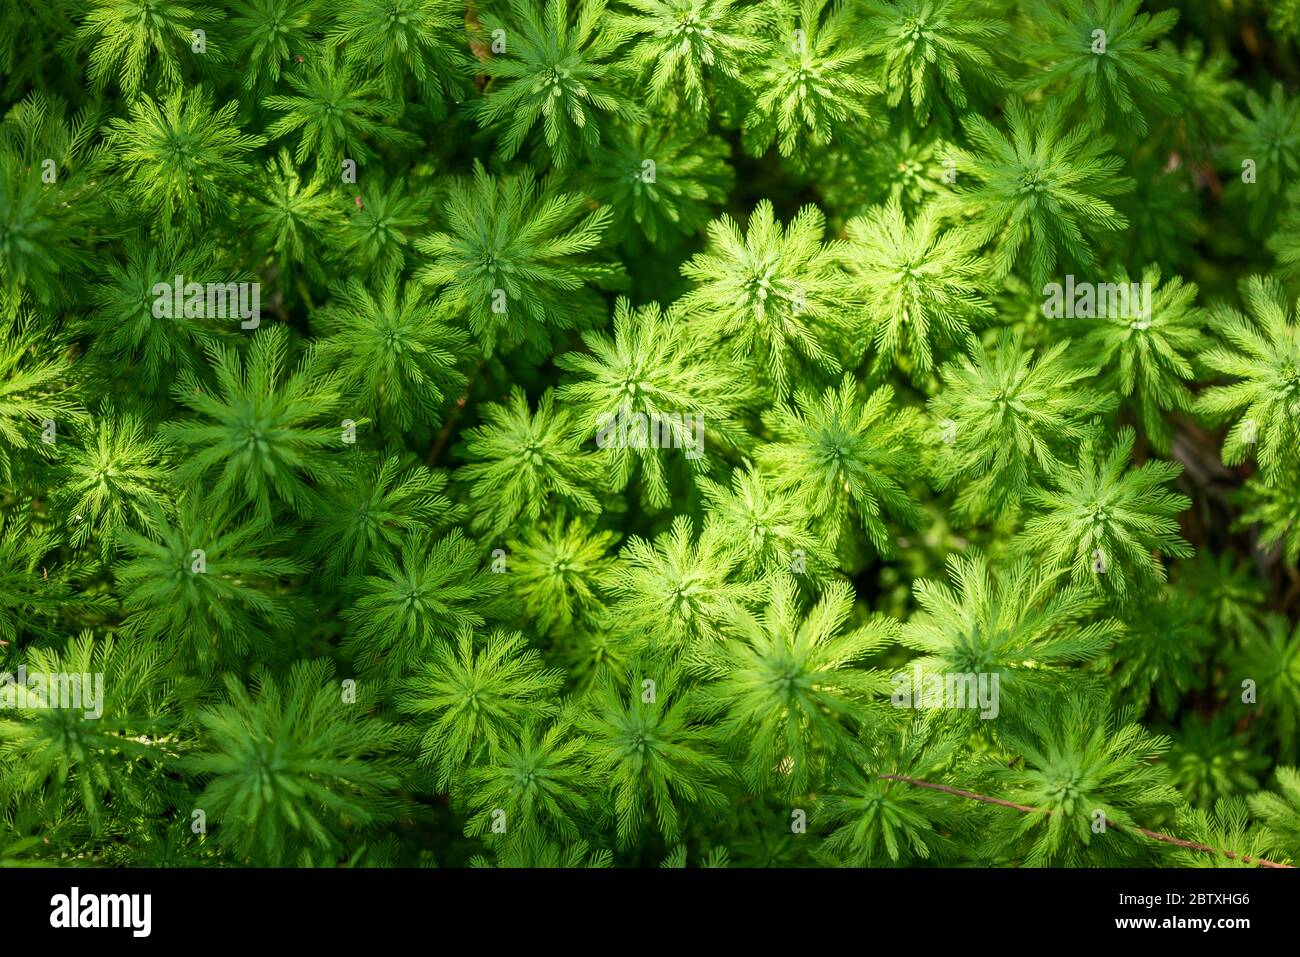 Eucalyptus and Parrot's feather - Myriophyllum aquaticum - green leaves close-up view in a pond in Chengdu, Sichuan province, China Stock Photo